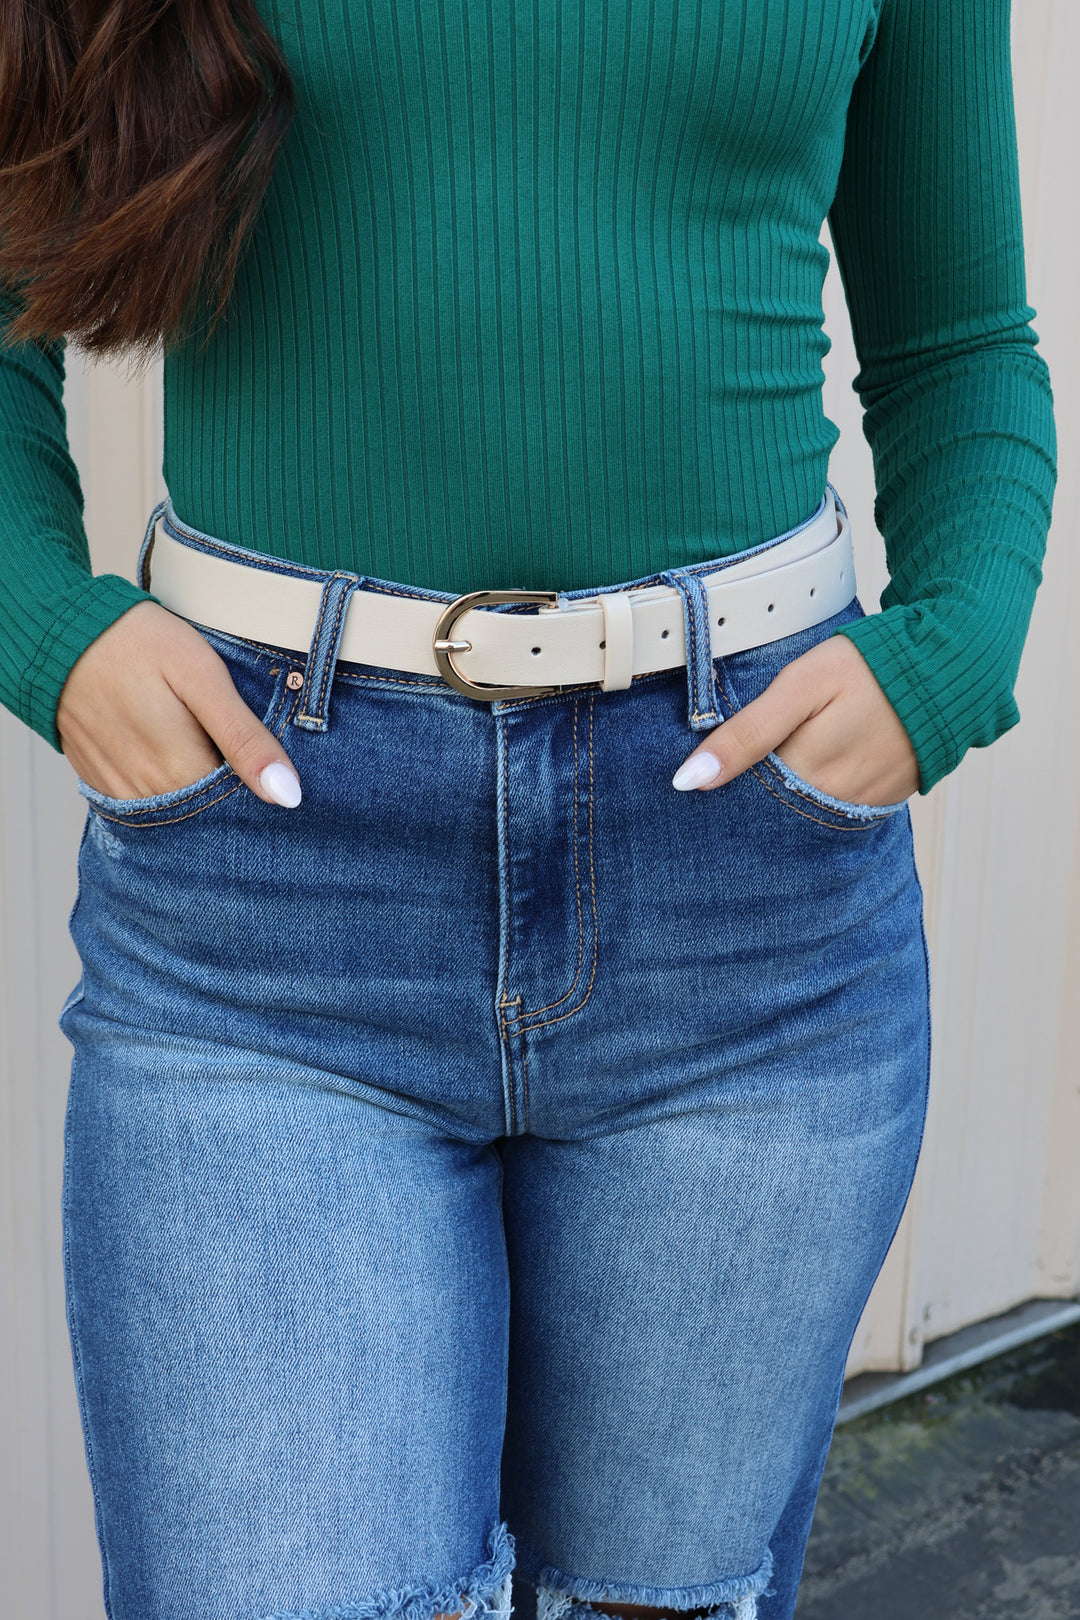 Jackie Belt In Gold - ShopSpoiled